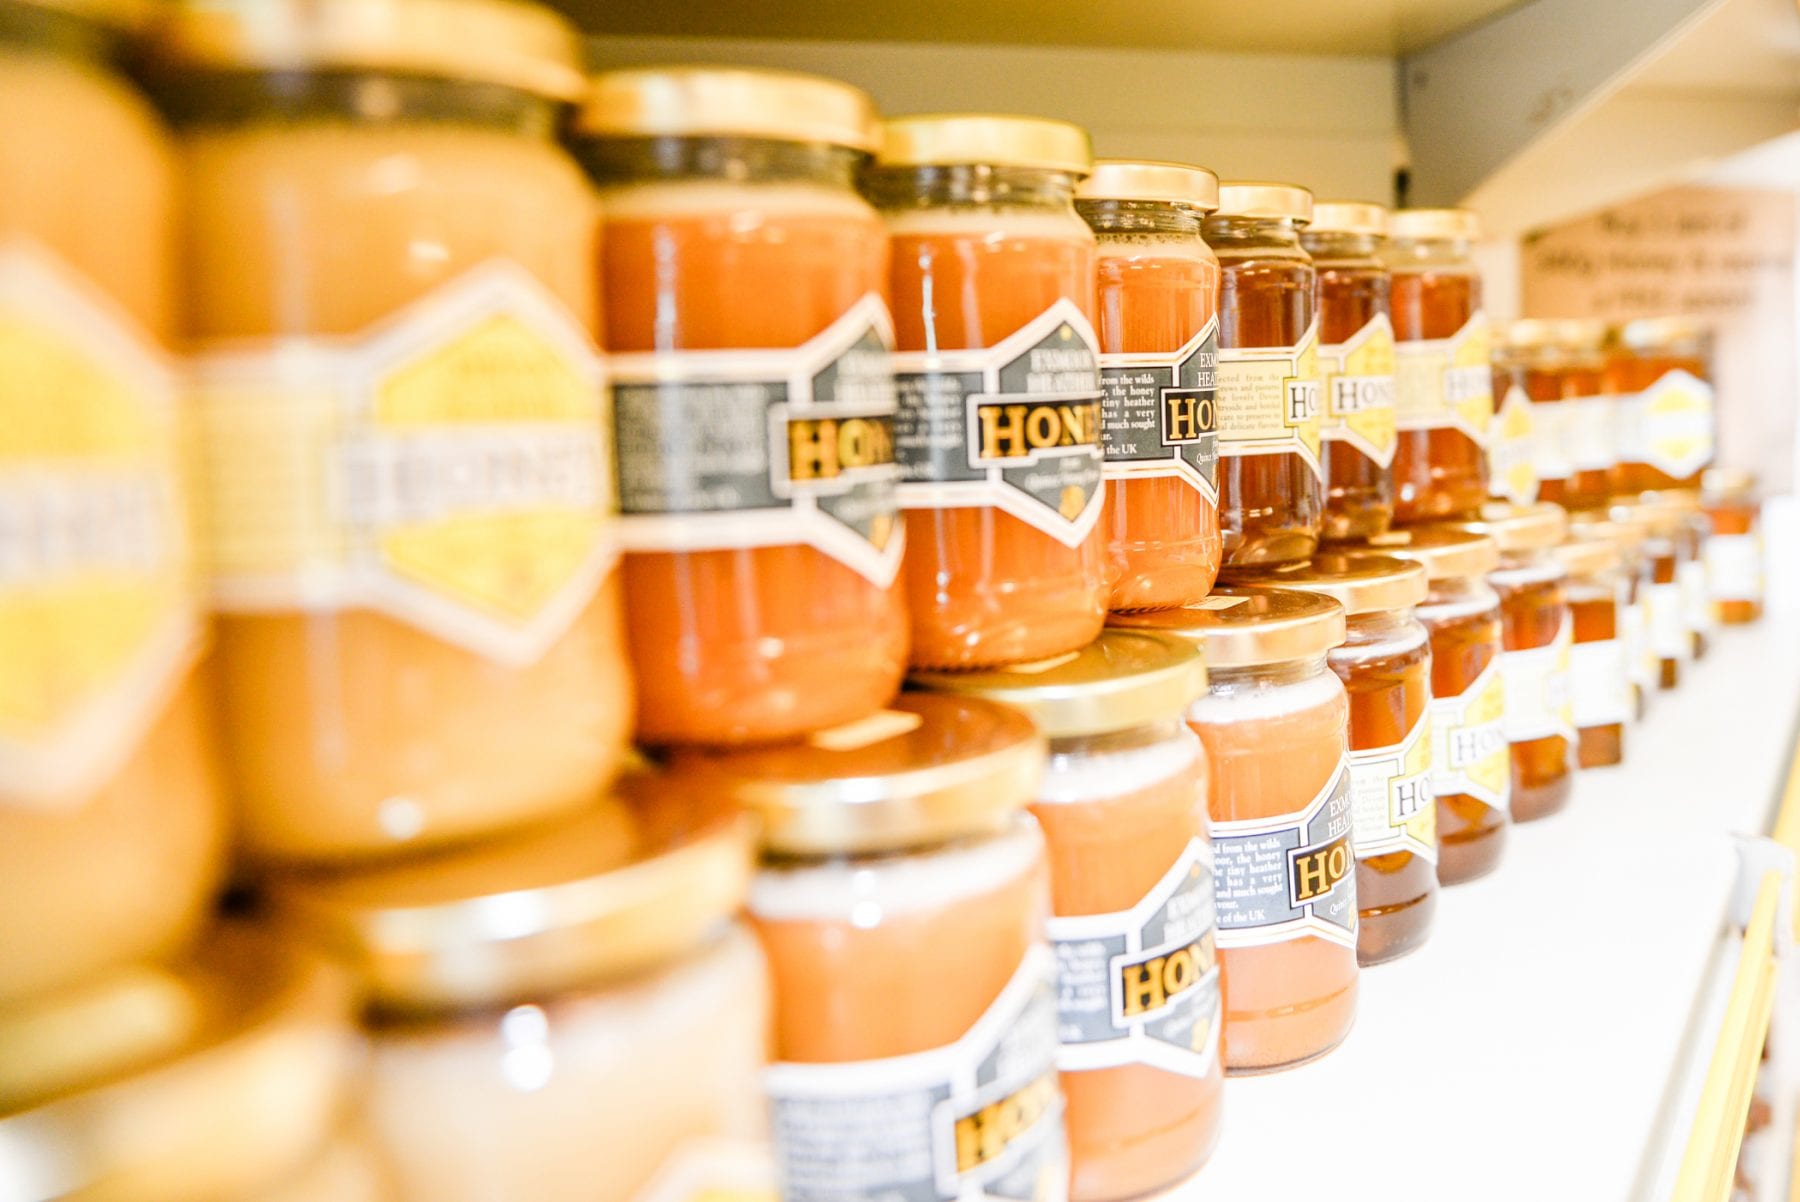 Pots of locally made honey, stacked on a shelf